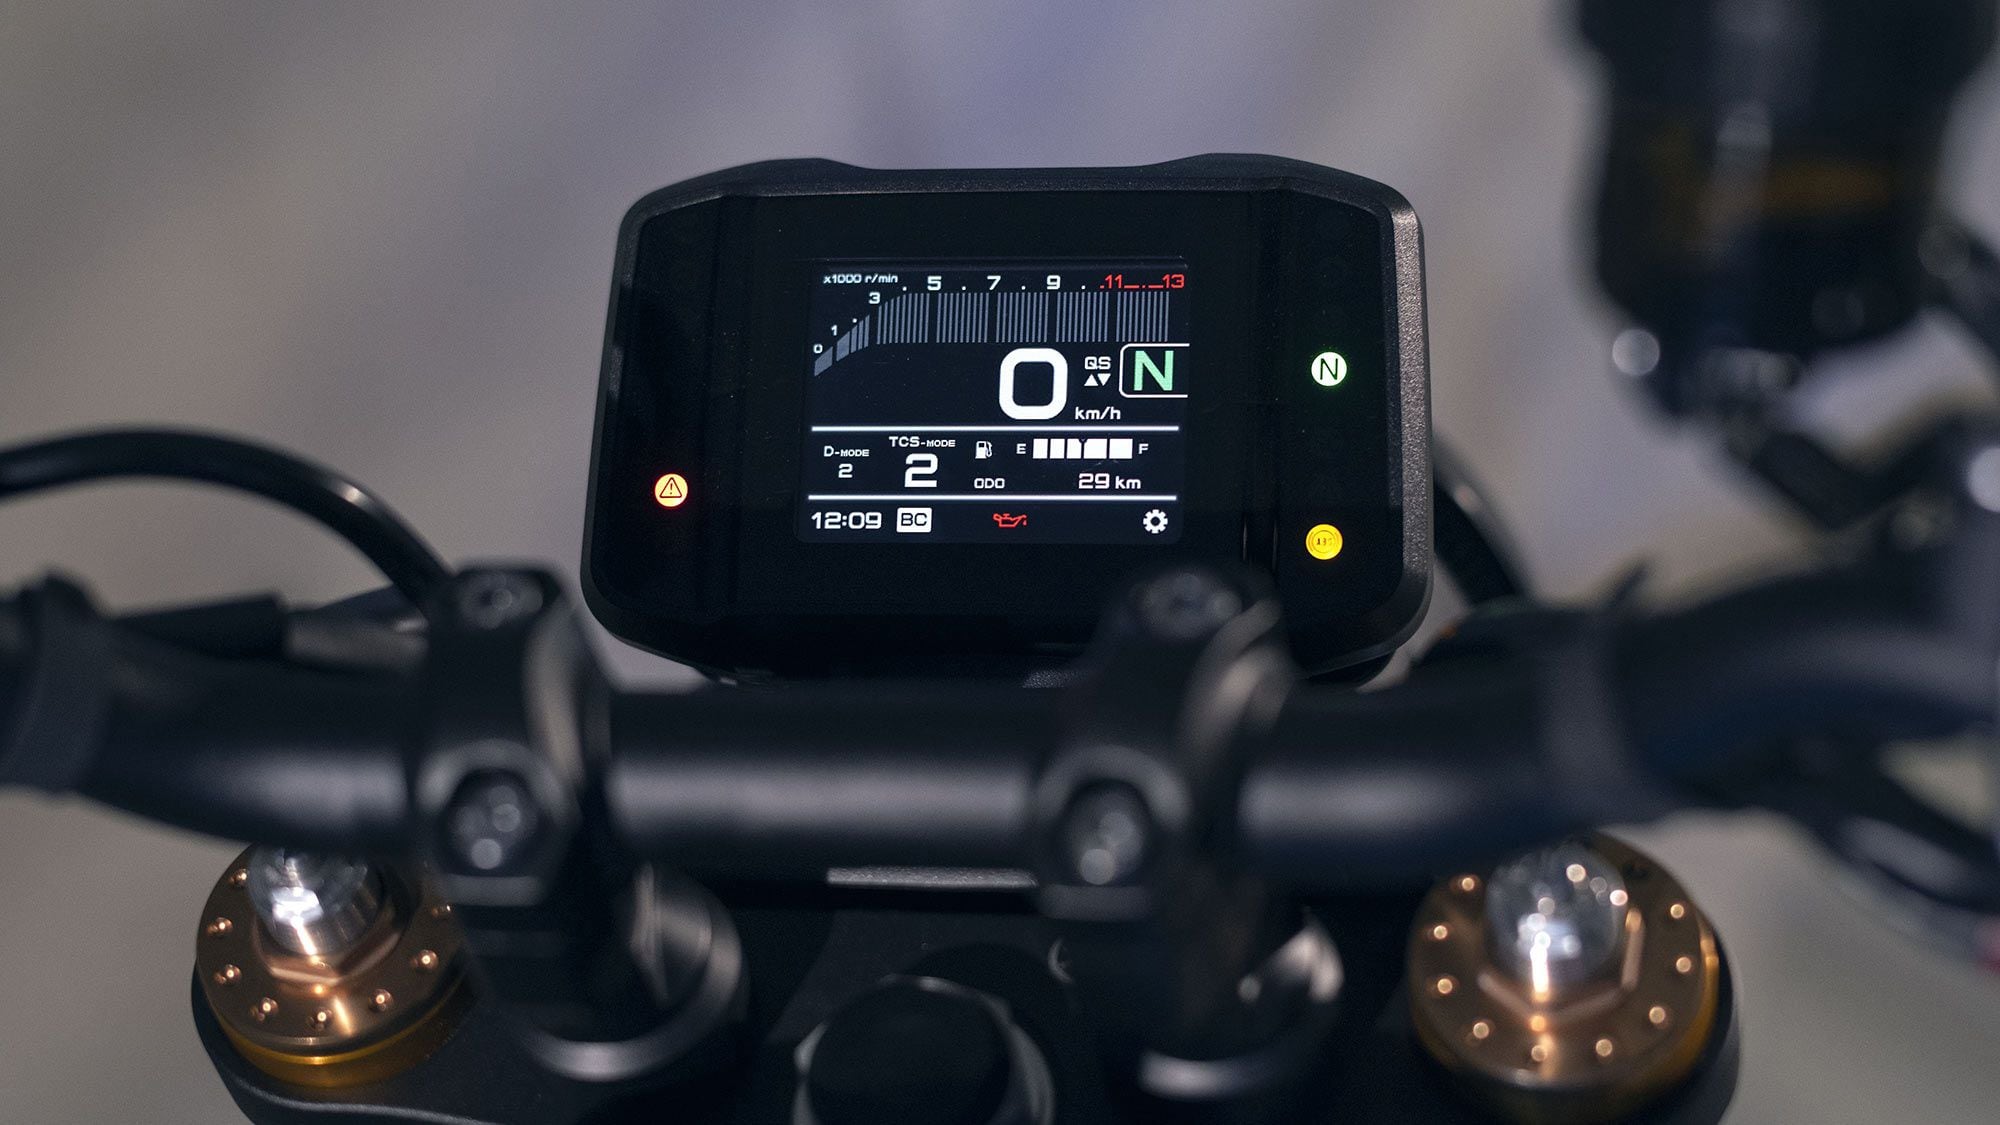 Six-axis IMU controls lean-sensitive traction control and cornering ABS. Rider modes can be selected on the 3.5-inch TFT color display.